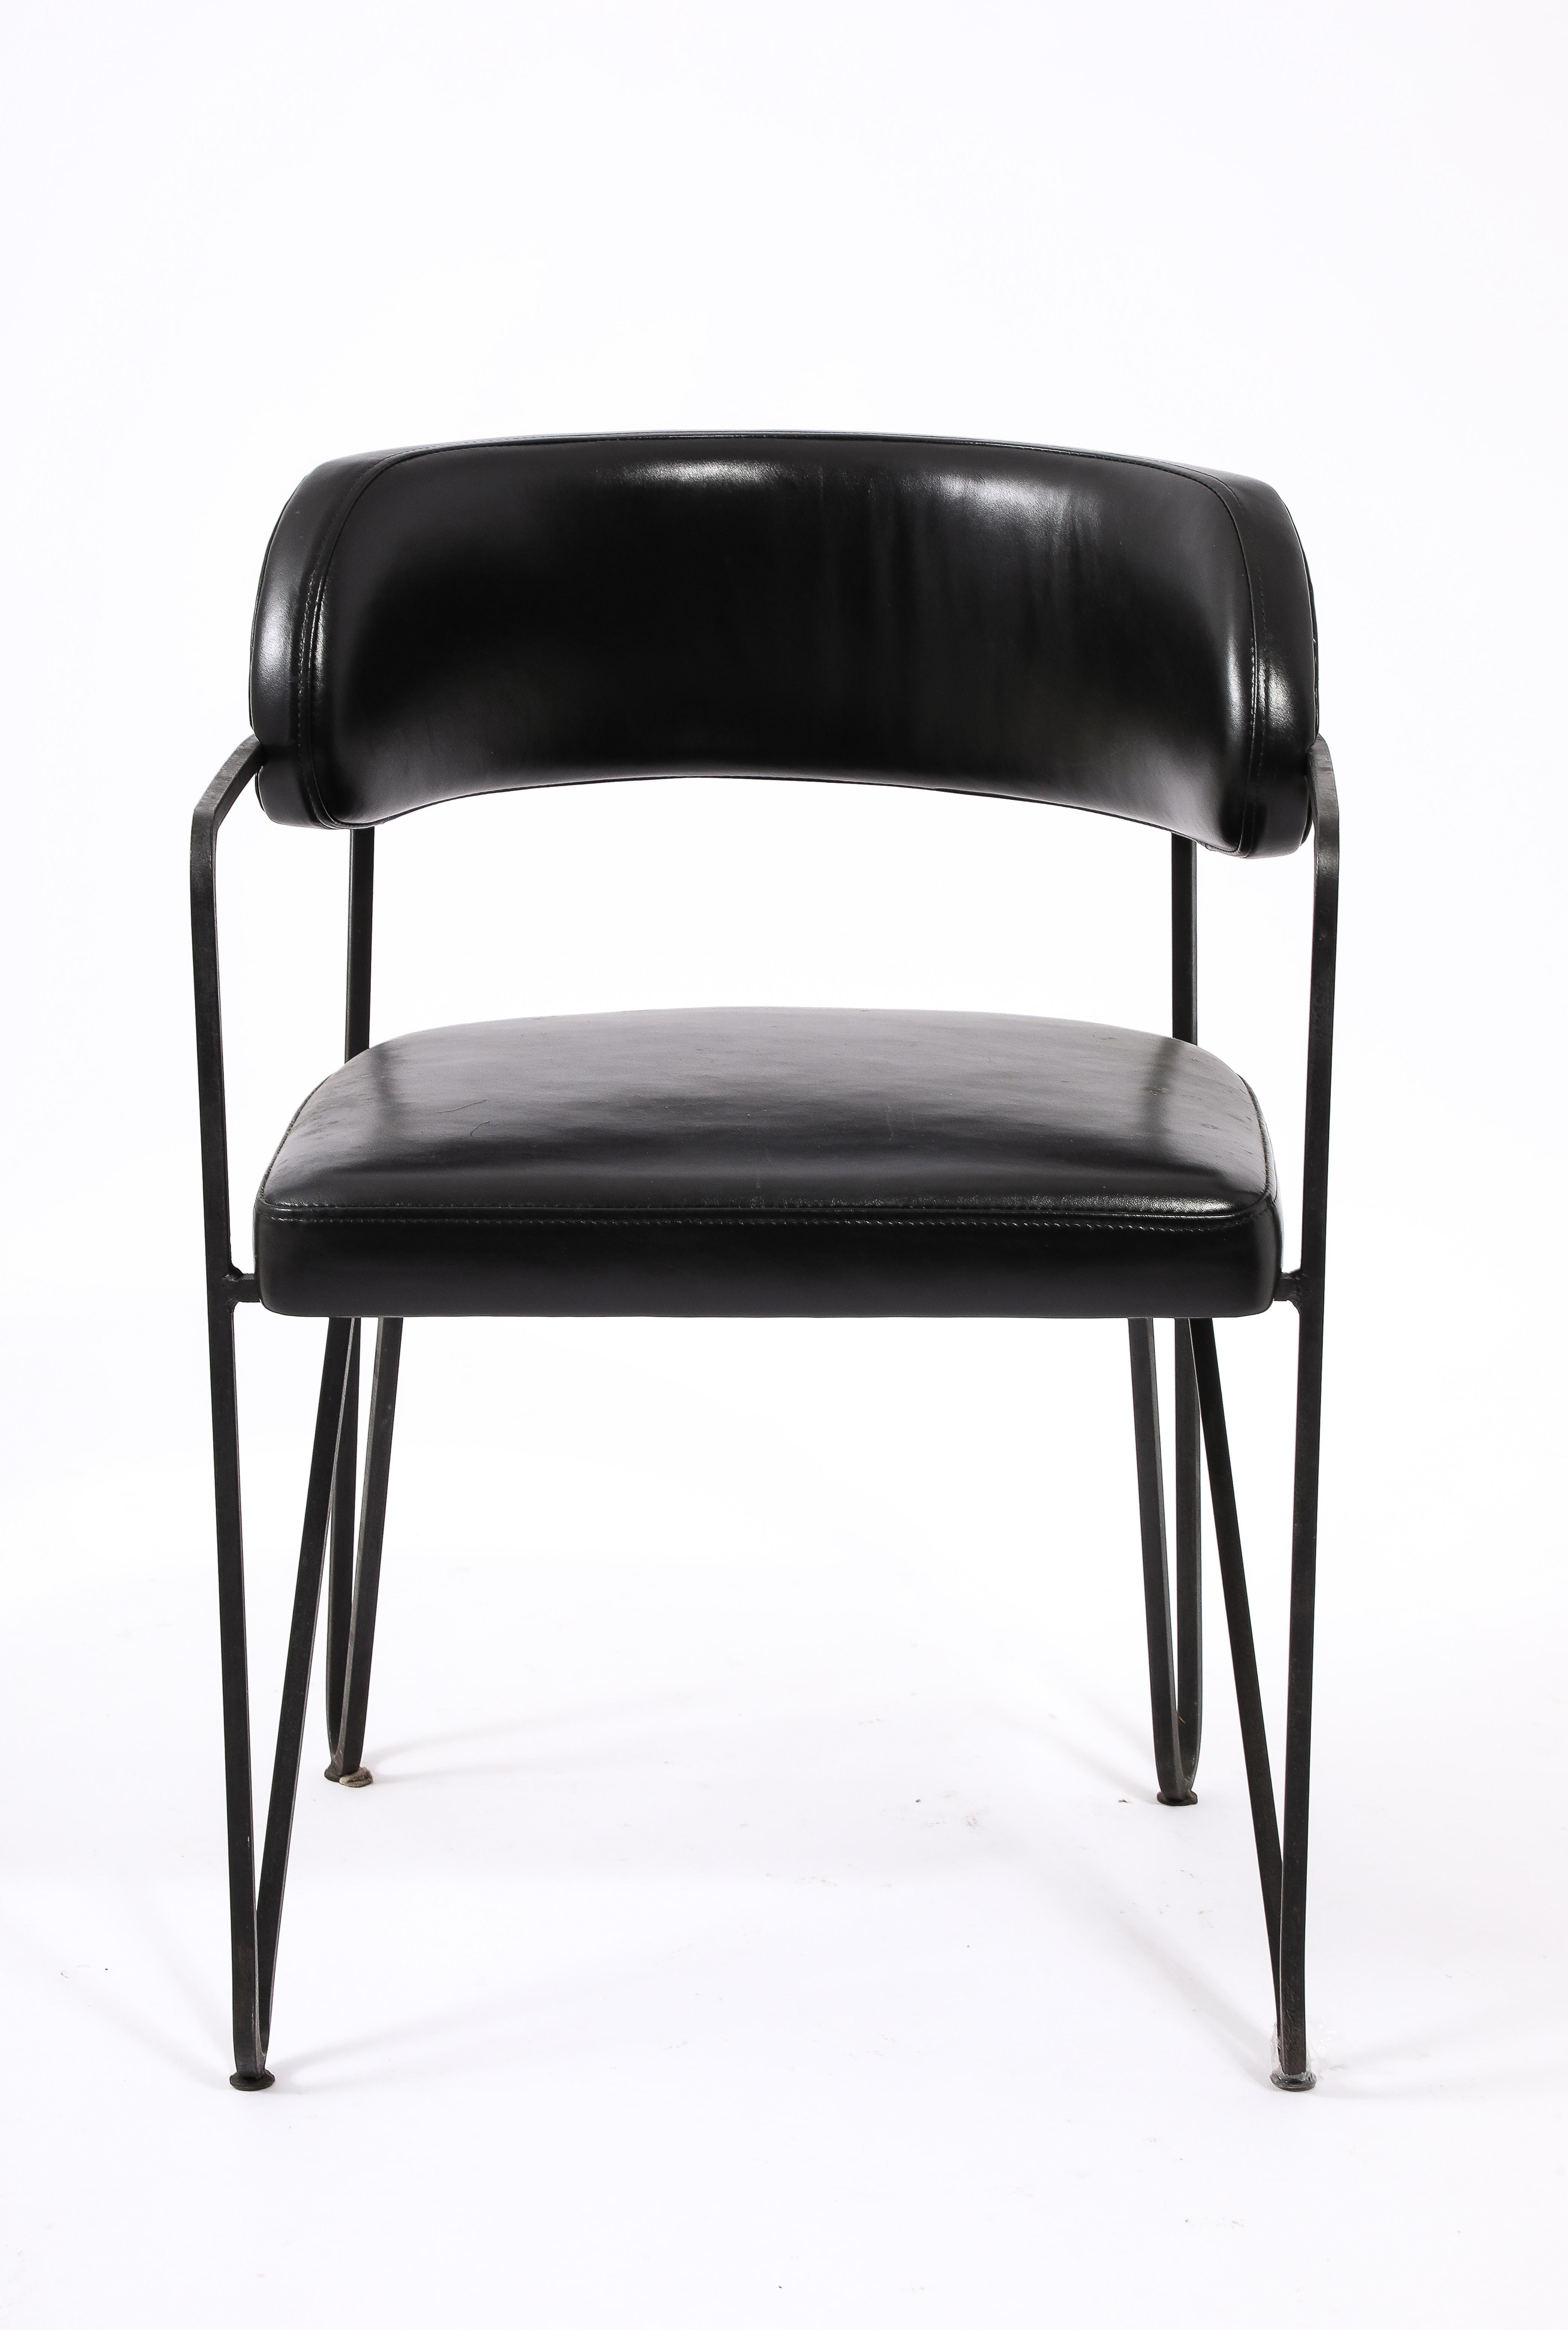 Square section wrought iron chair with comfortable curved back.
Twelve available.
